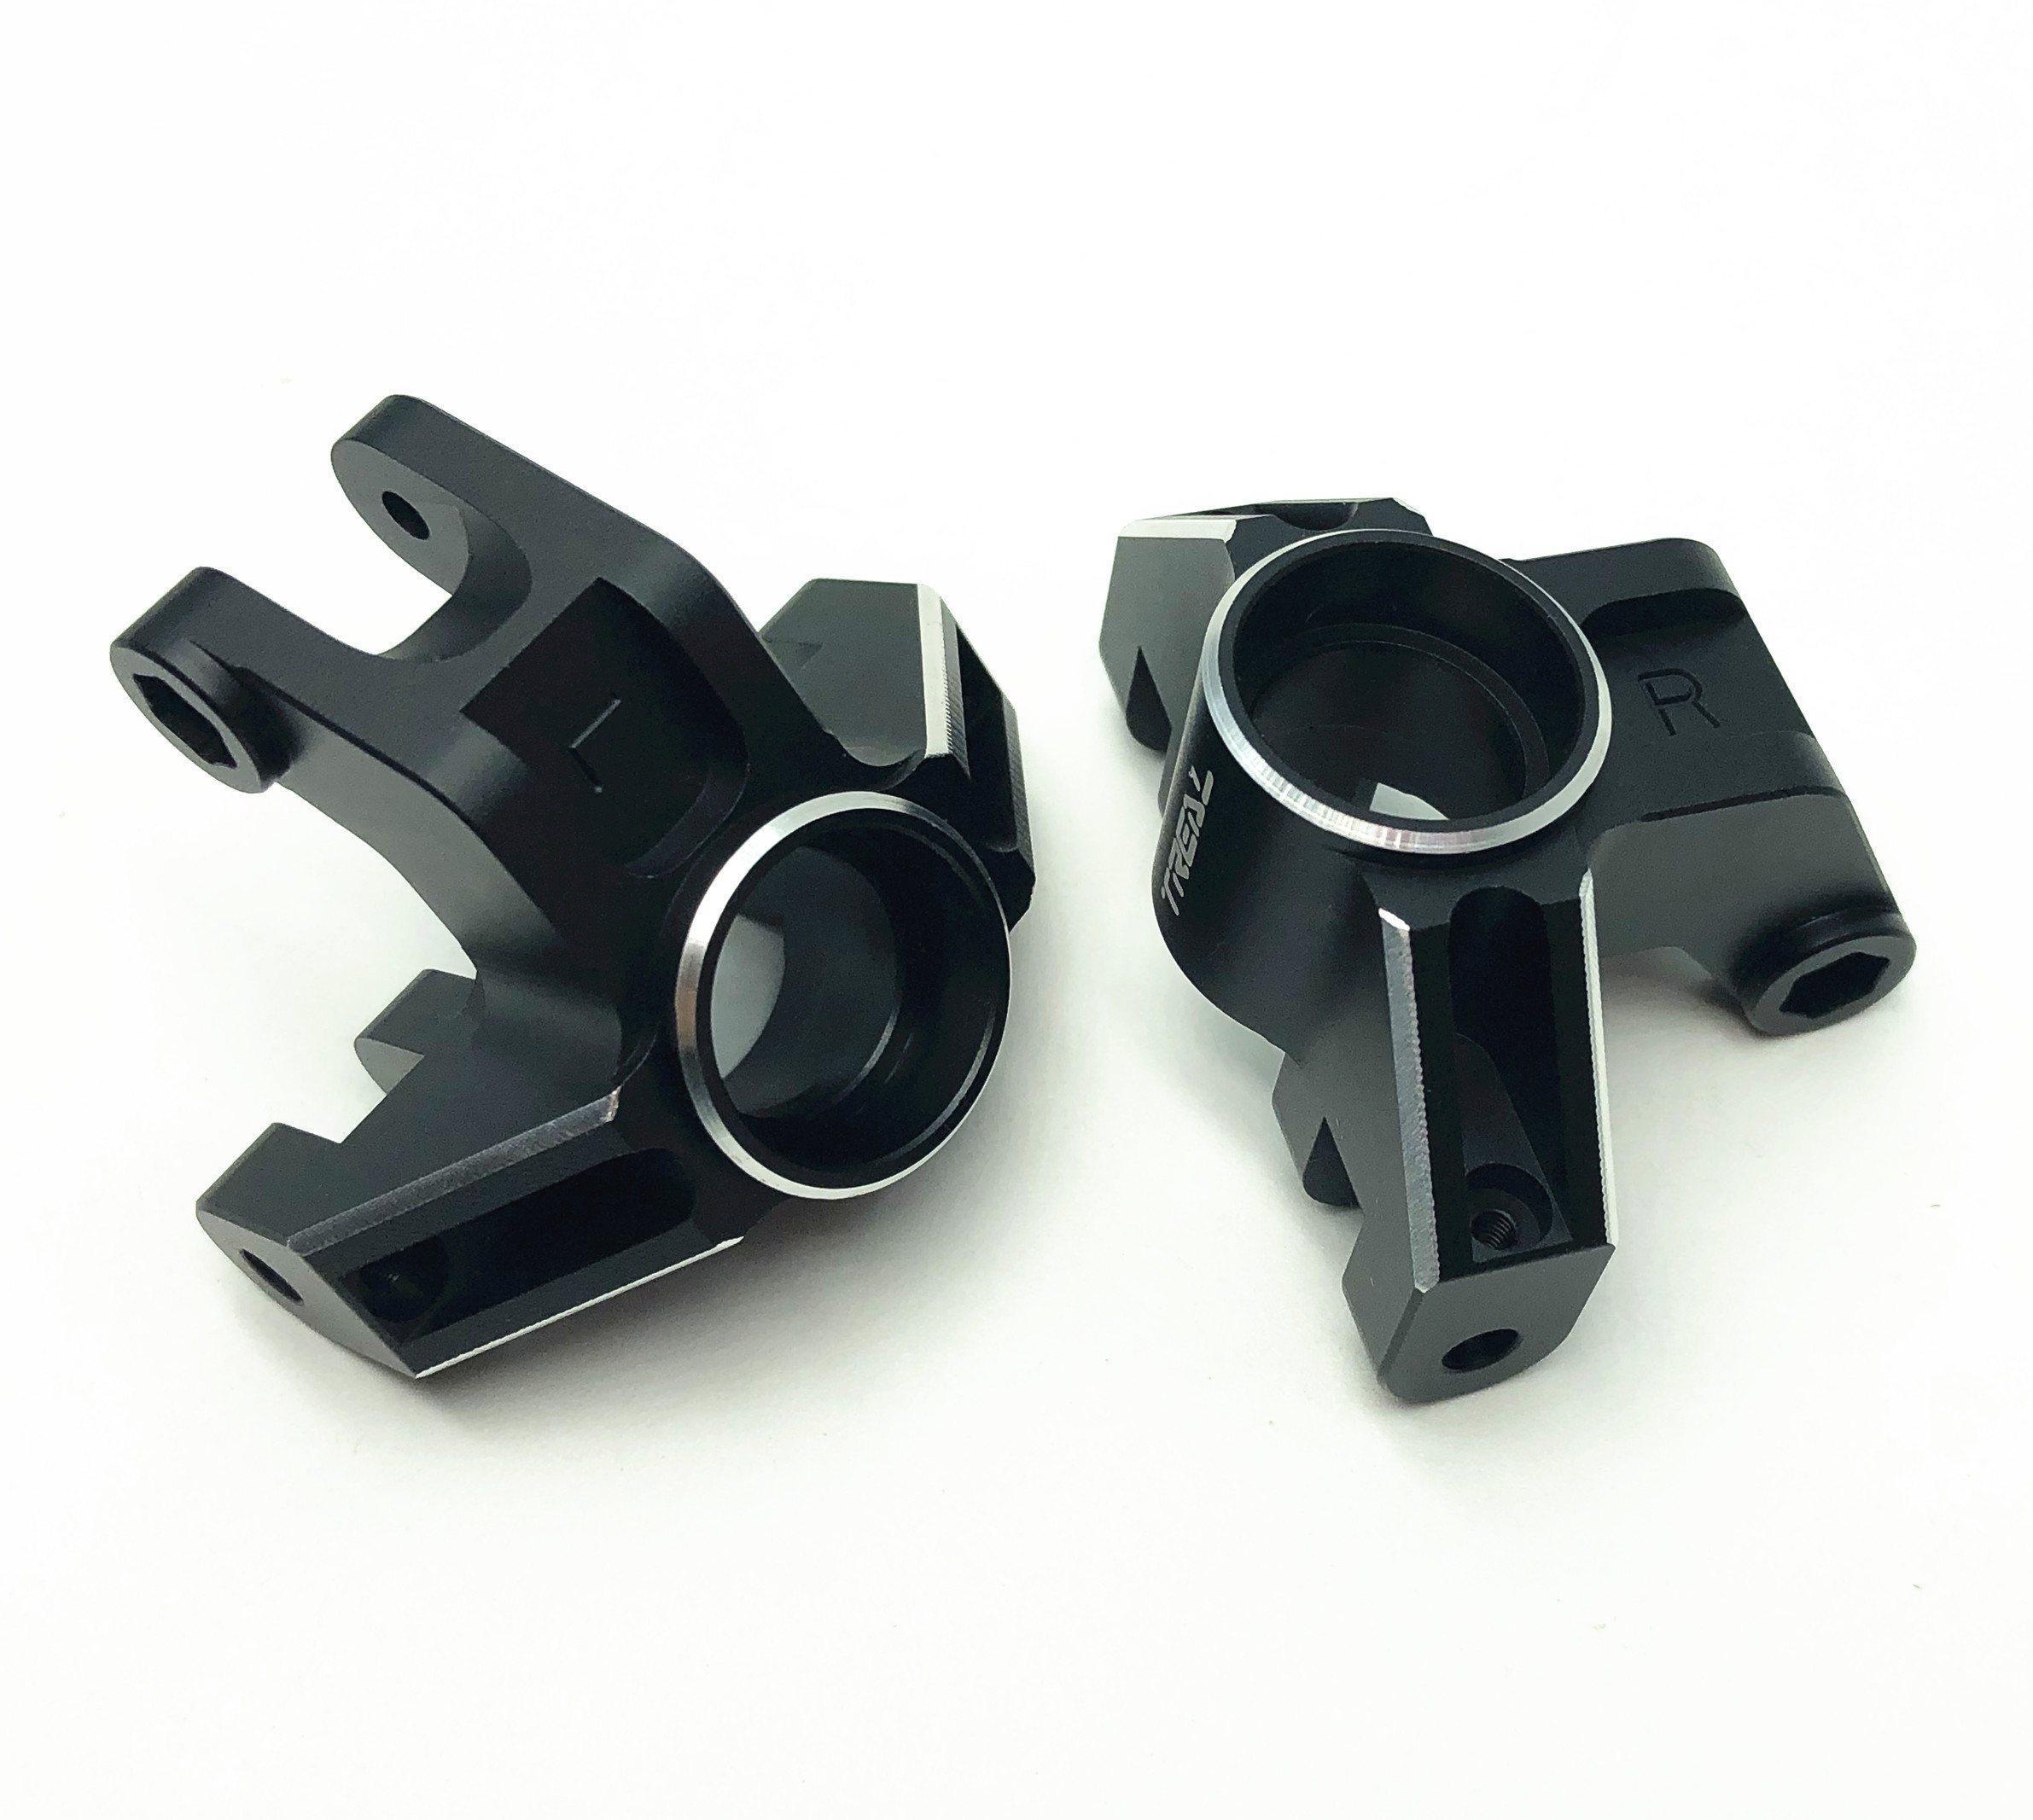 Treal Aluminum 7075 Front Steering Knuckels for Losi LMT (Black) ...